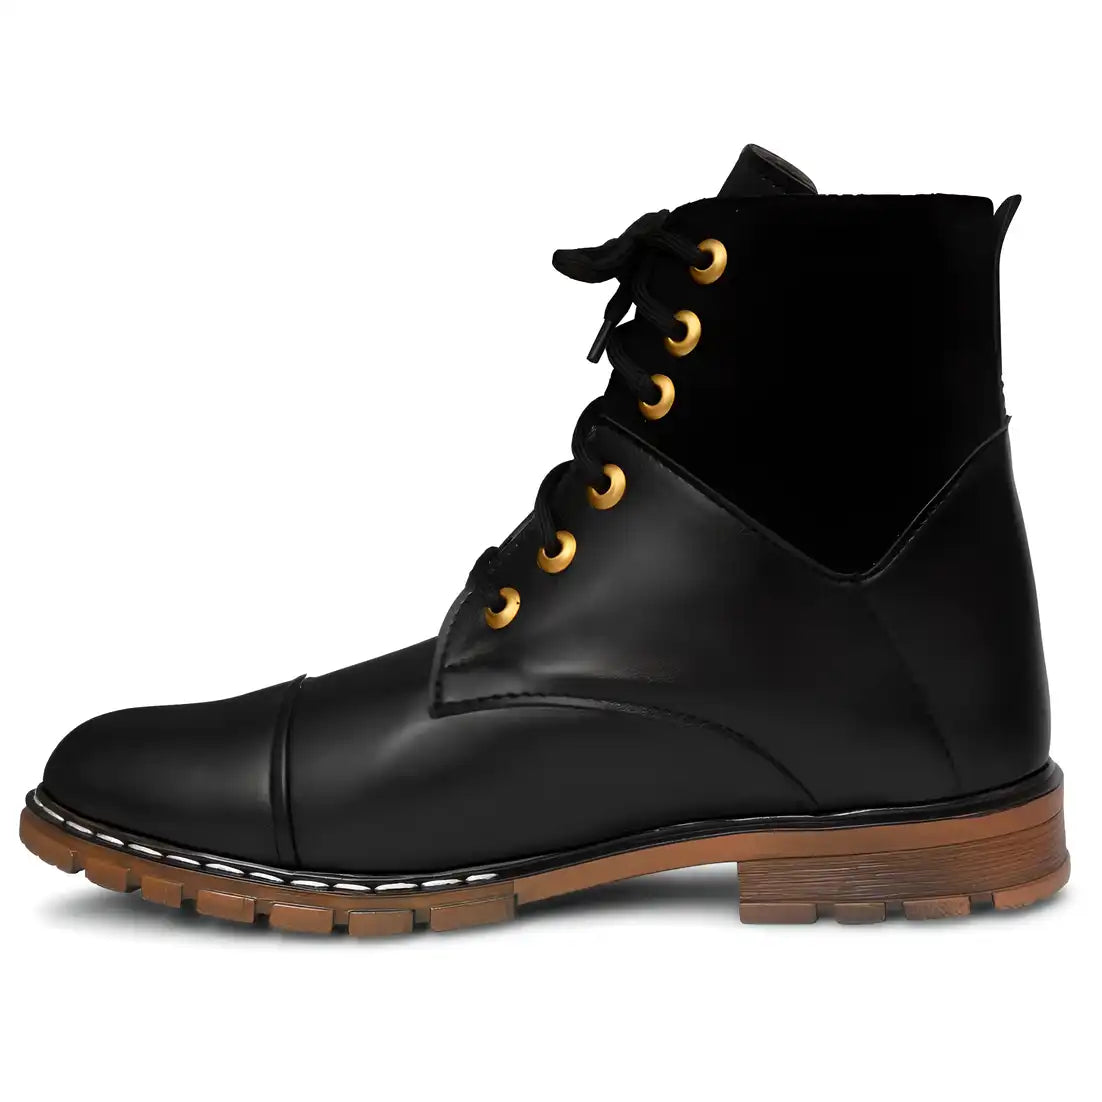 Outdoor Casual Heritage Boot For Men